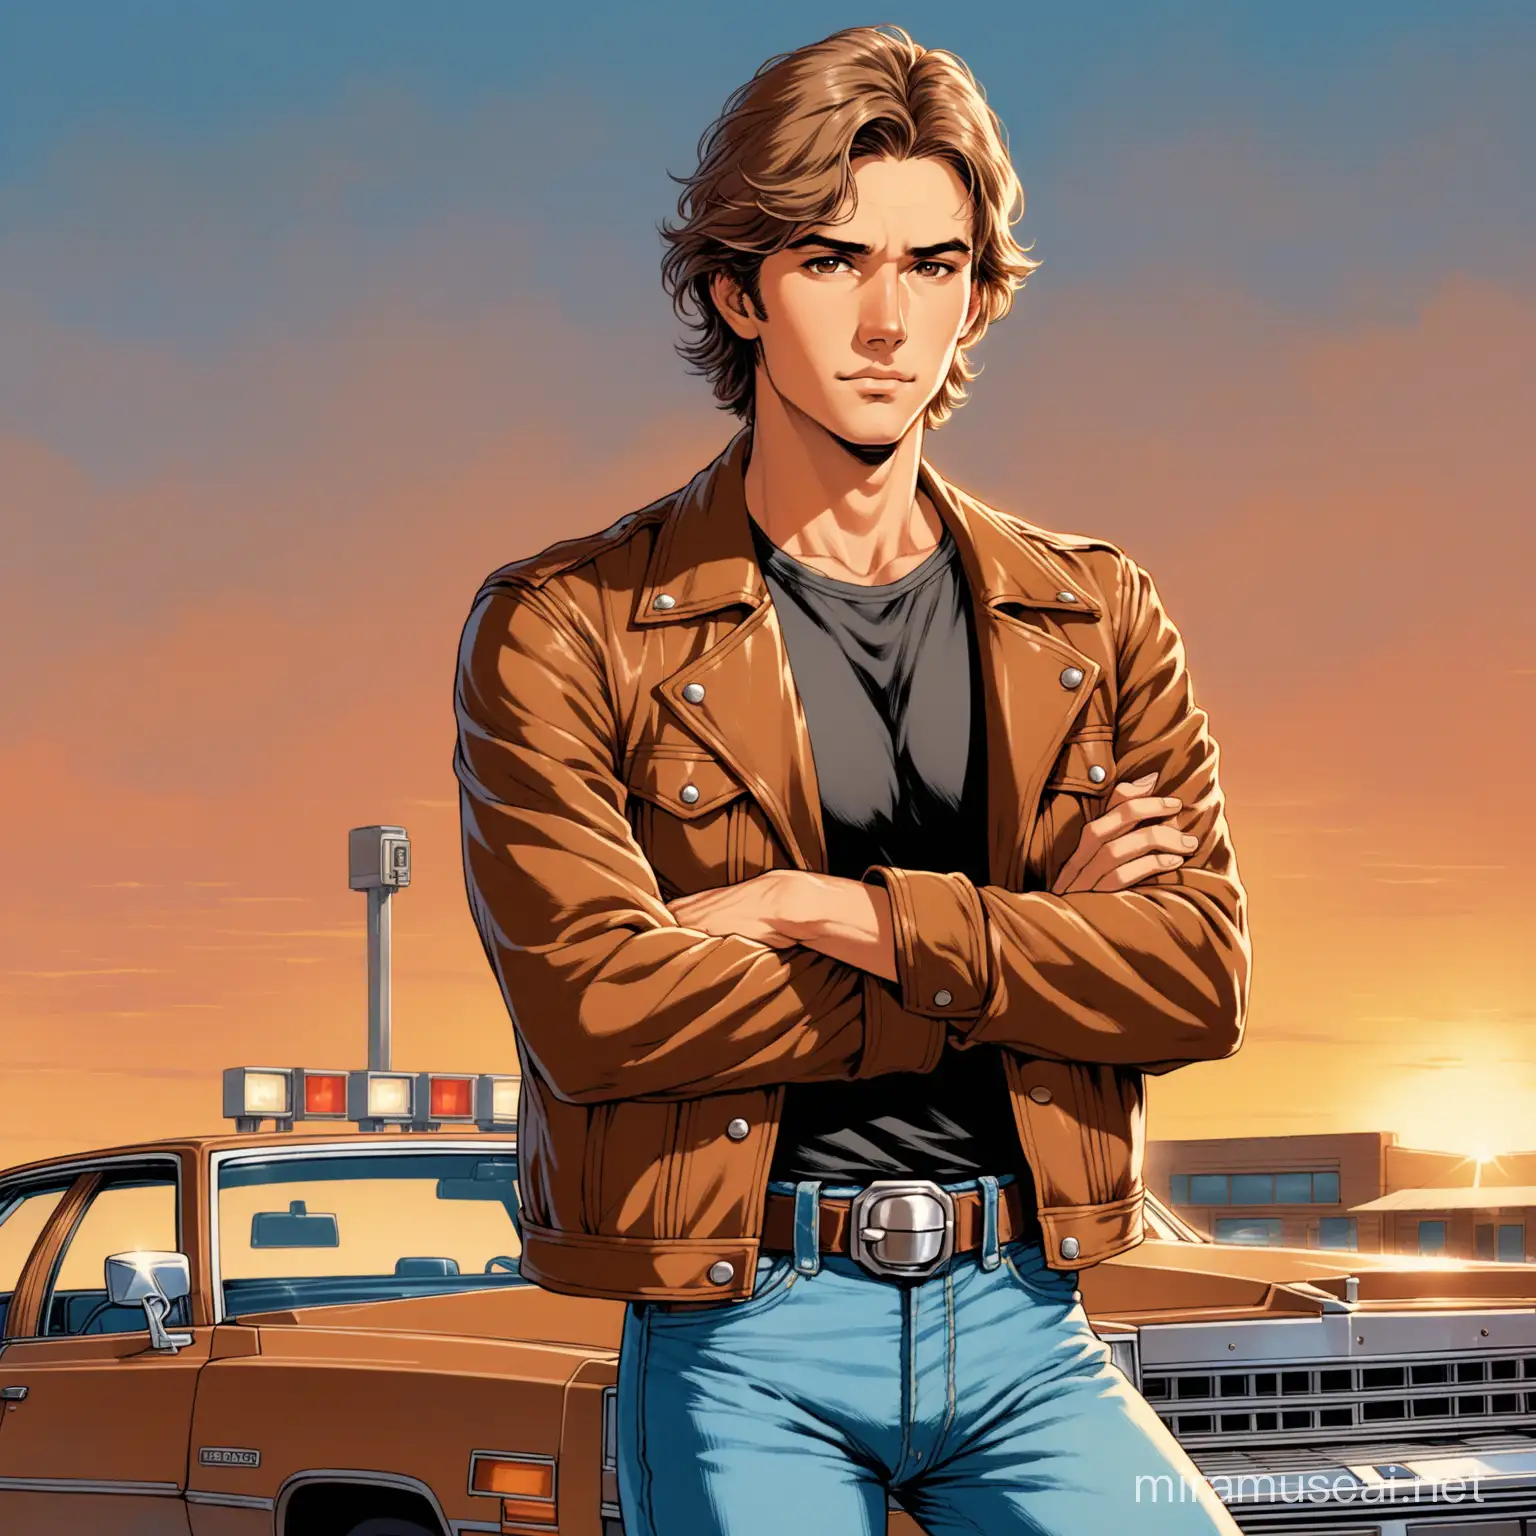 Handsome Texan Man in 1980s SemiRealism Art Style at Gas Station